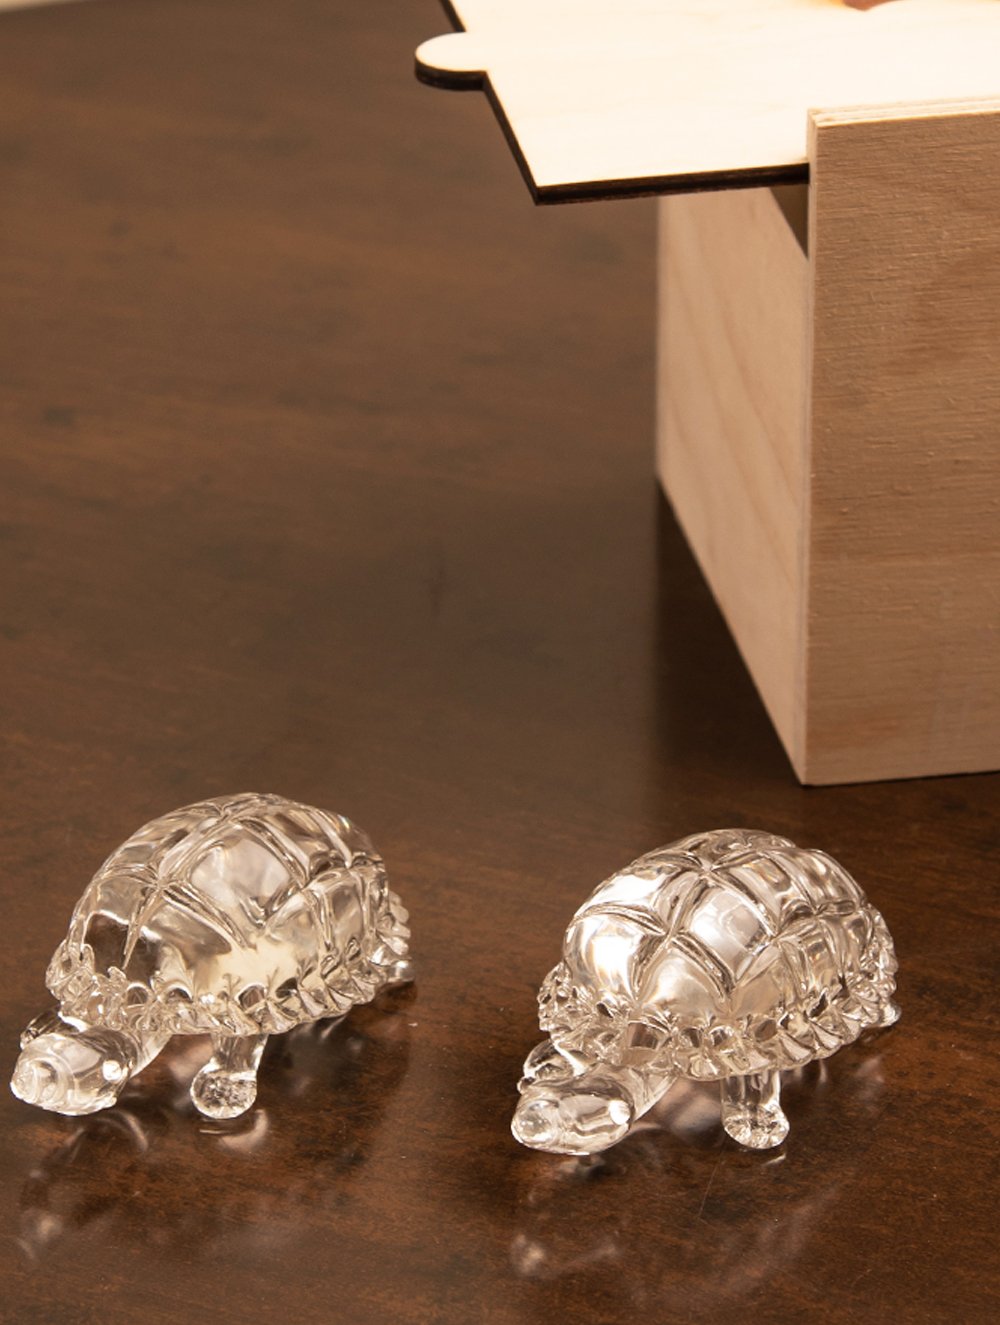 Load image into Gallery viewer, Fine Crystal Glass Curios - Tortoise (Set of 2)